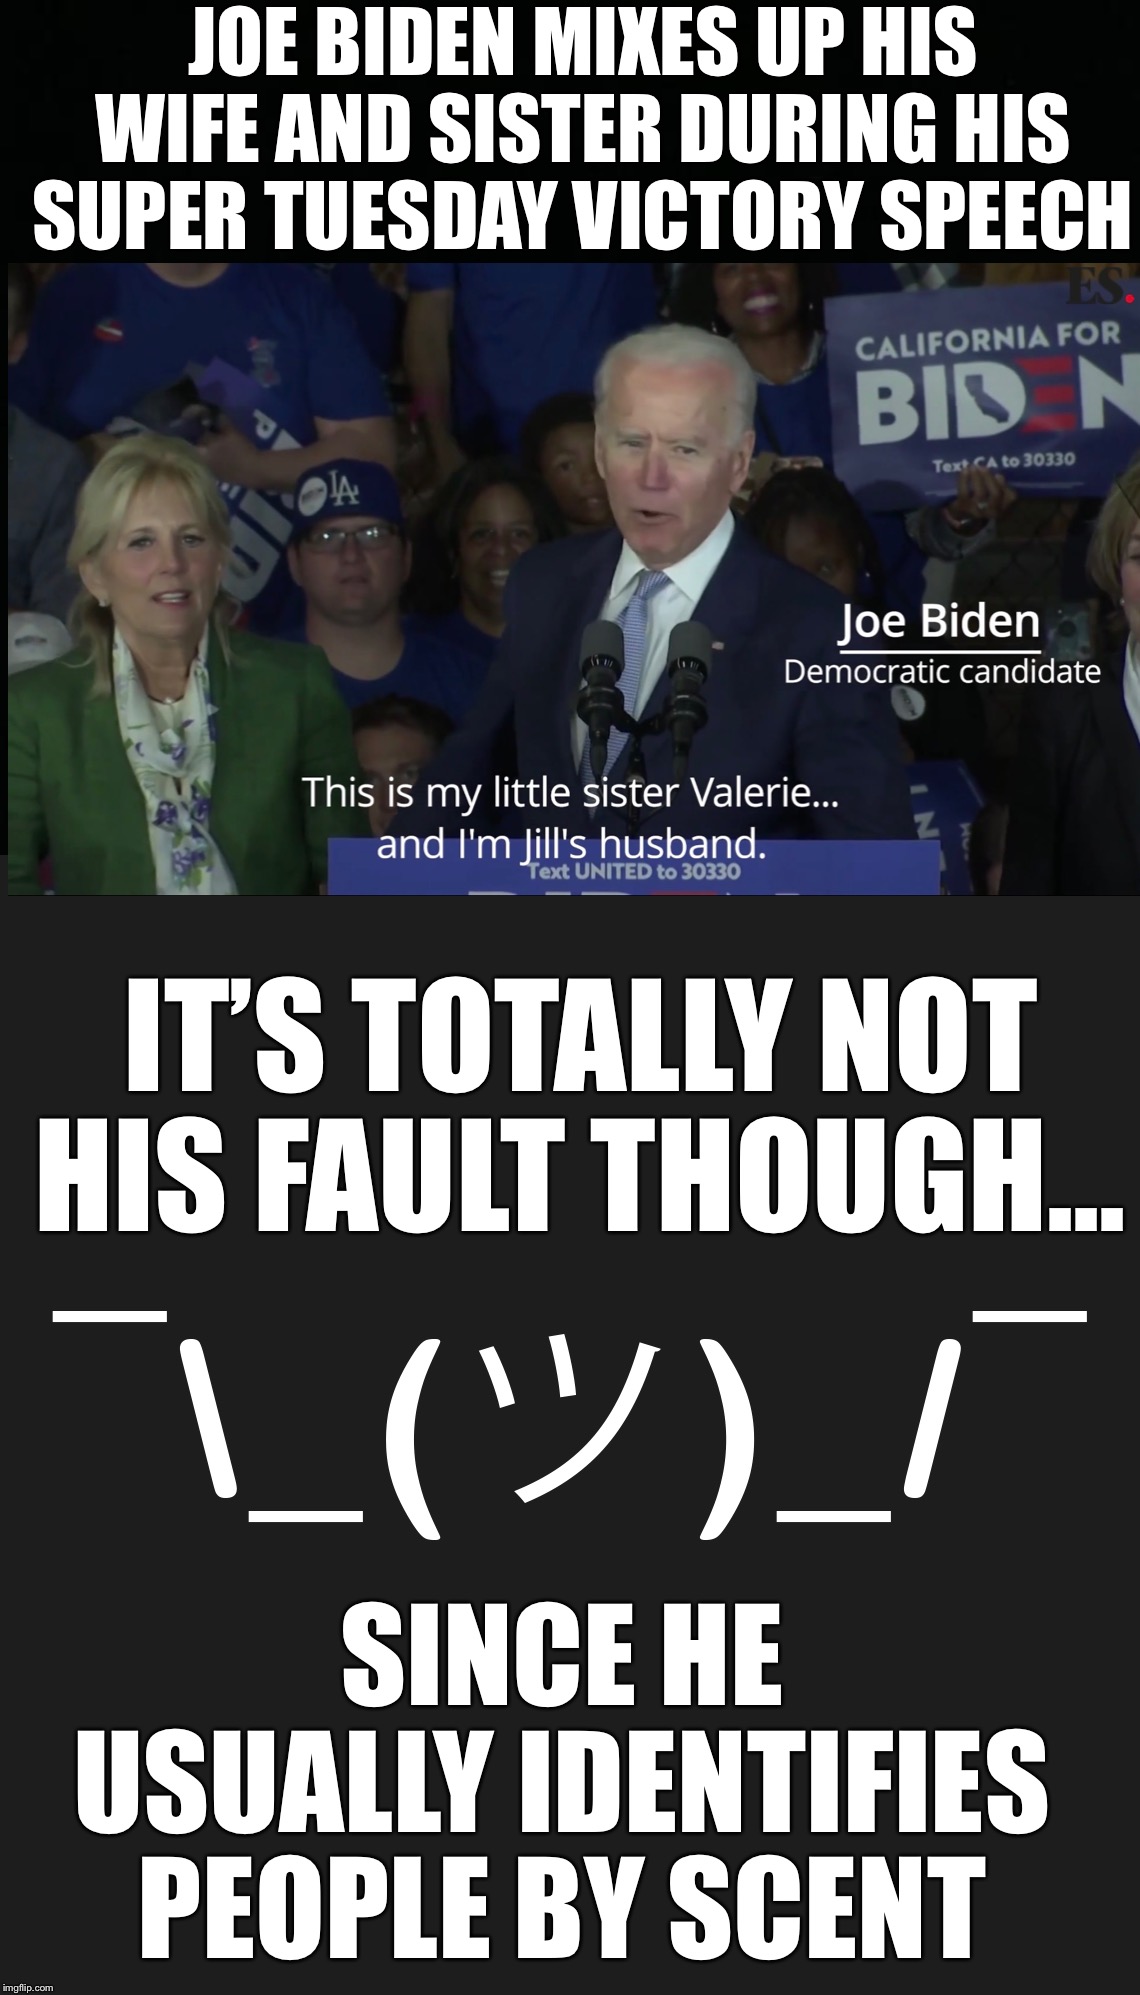 Joe Biden mixes up his wife and sister during his super Tuesday victory speech... | JOE BIDEN MIXES UP HIS WIFE AND SISTER DURING HIS SUPER TUESDAY VICTORY SPEECH; IT’S TOTALLY NOT HIS FAULT THOUGH... SINCE HE USUALLY IDENTIFIES PEOPLE BY SCENT | image tagged in joe biden,jill biden,mixes up wife and sister,Conservative | made w/ Imgflip meme maker